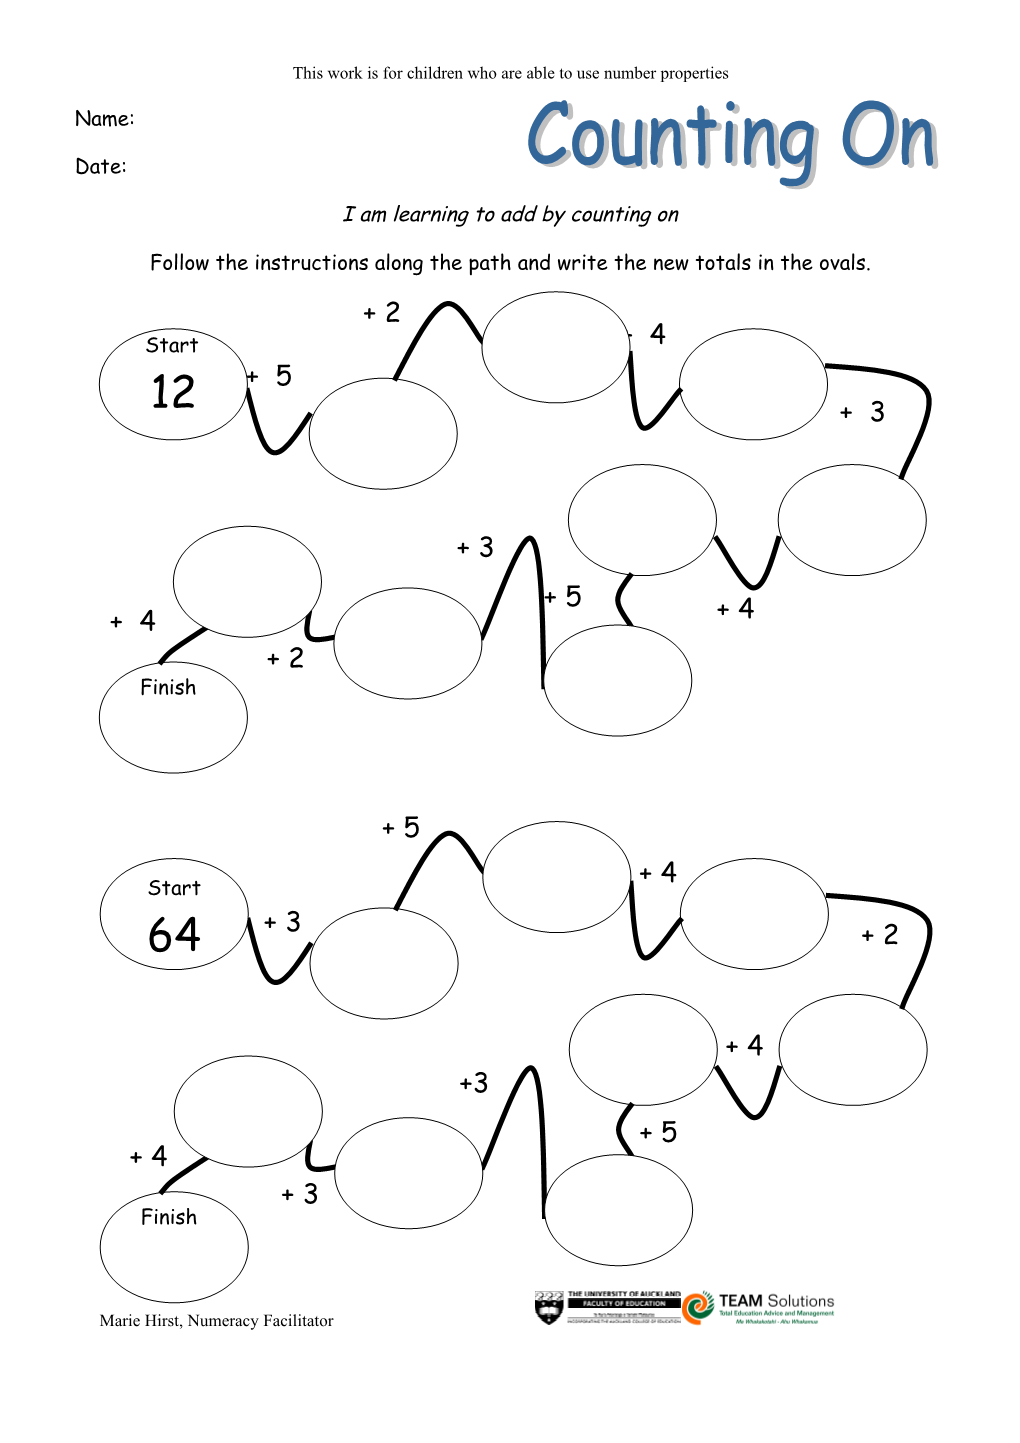 This Work Is for Children Who Are Able to Use Number Properties